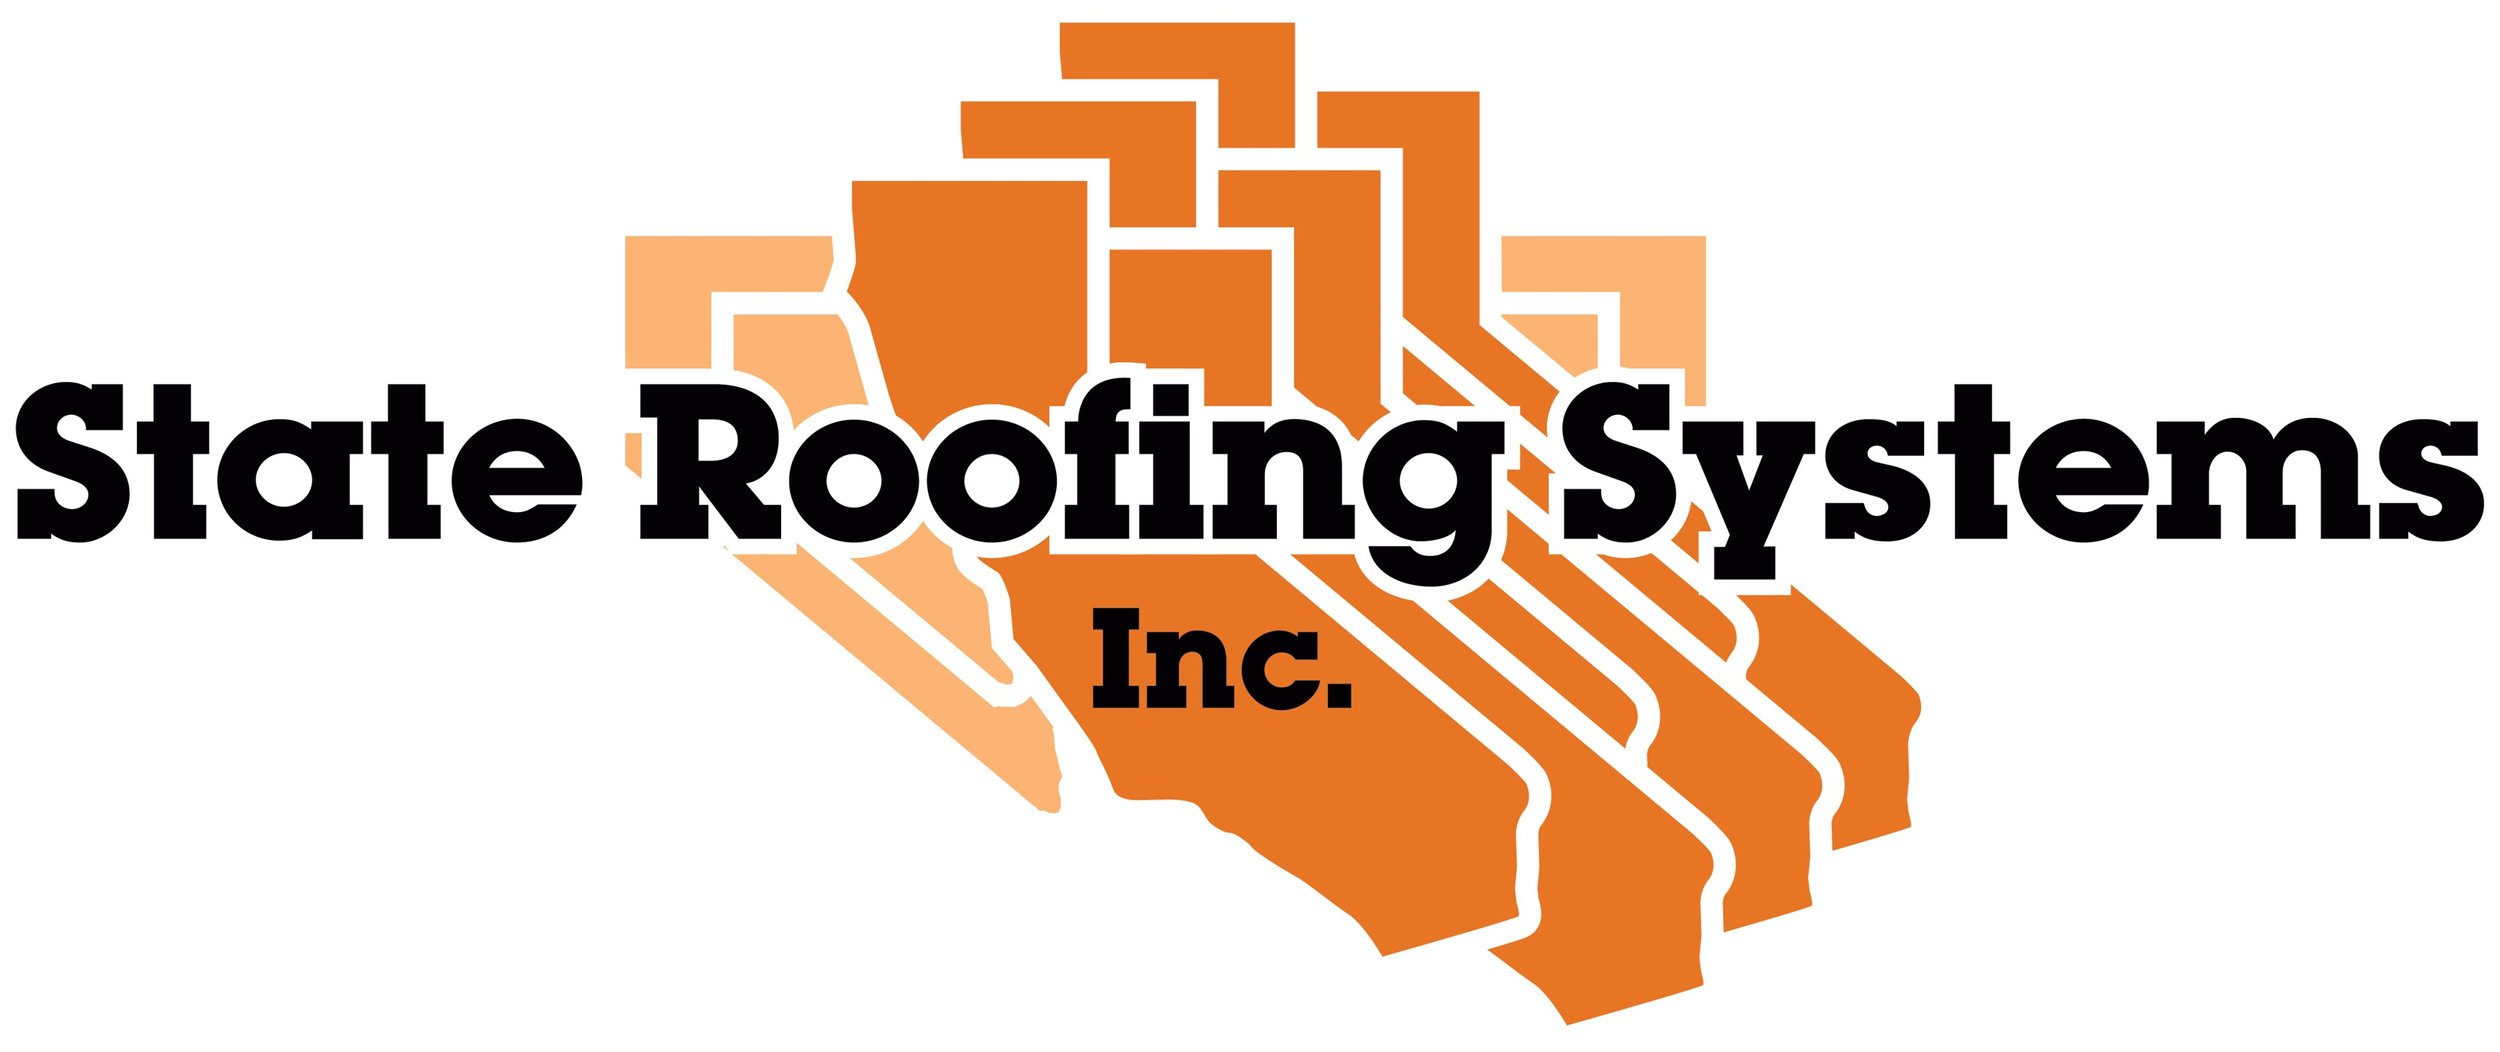 State Roofing Systems.jpg